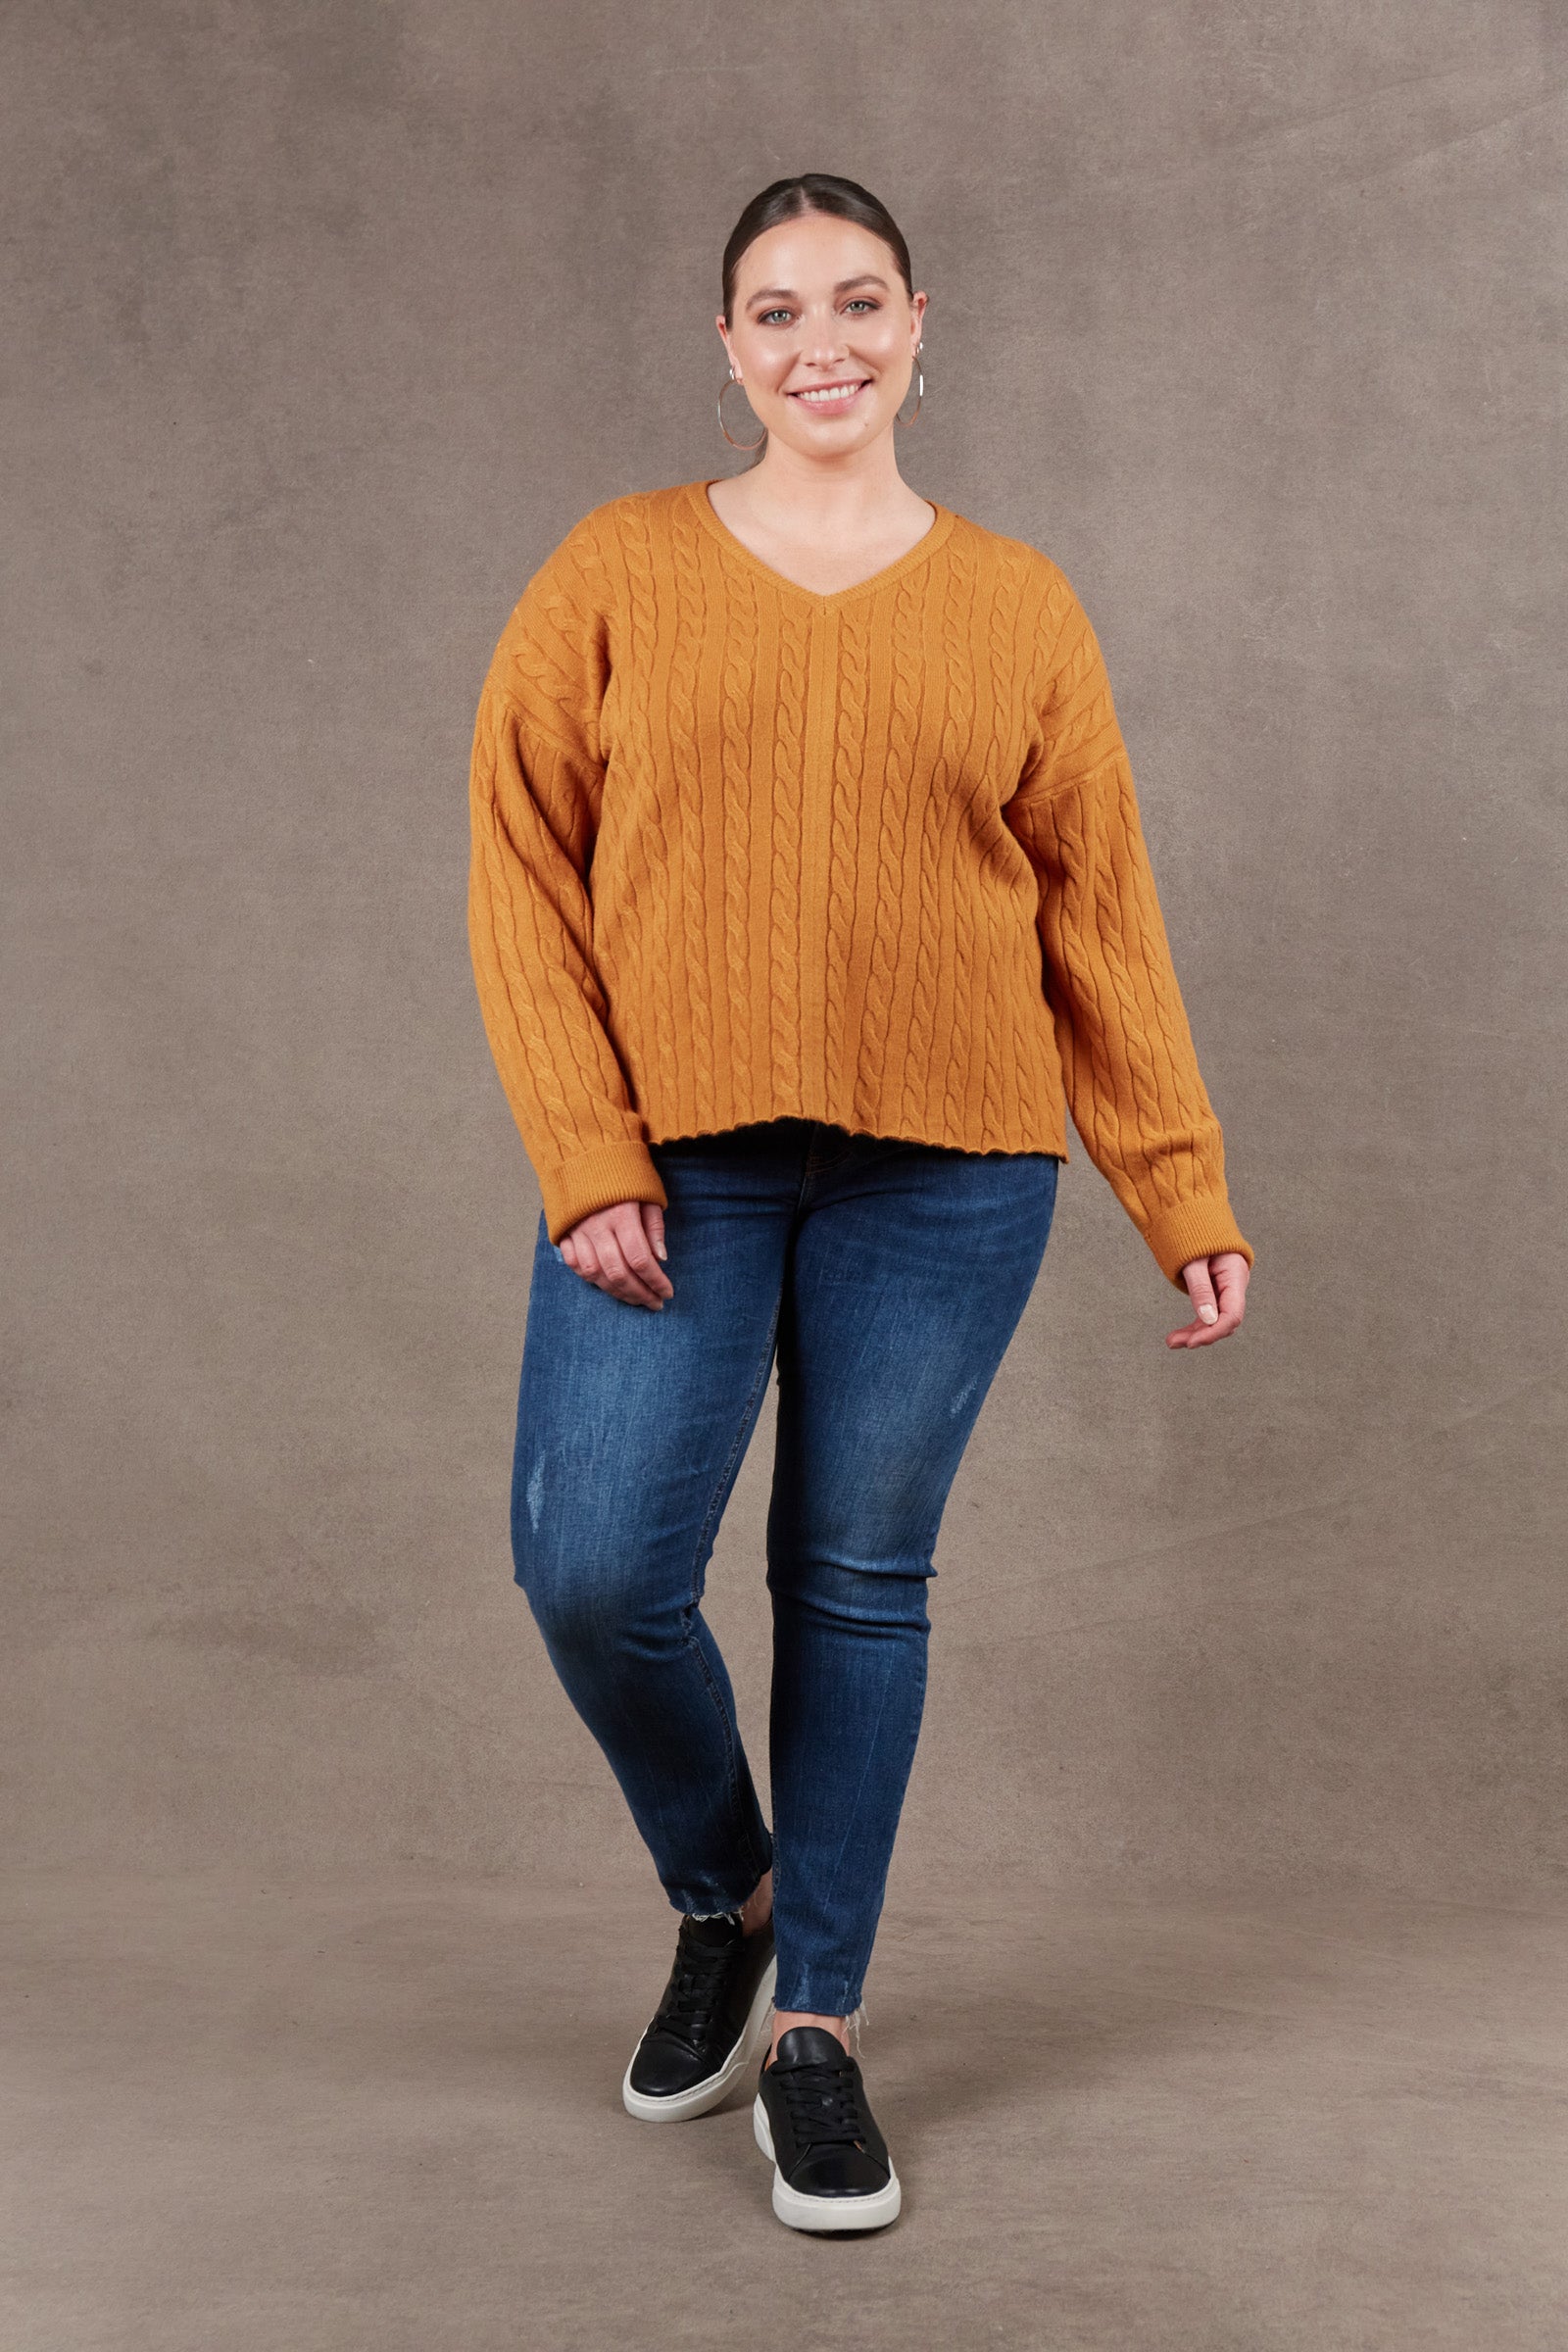 Alawa Cable Knit - Ochre - eb&ive Clothing - Knit Jumper